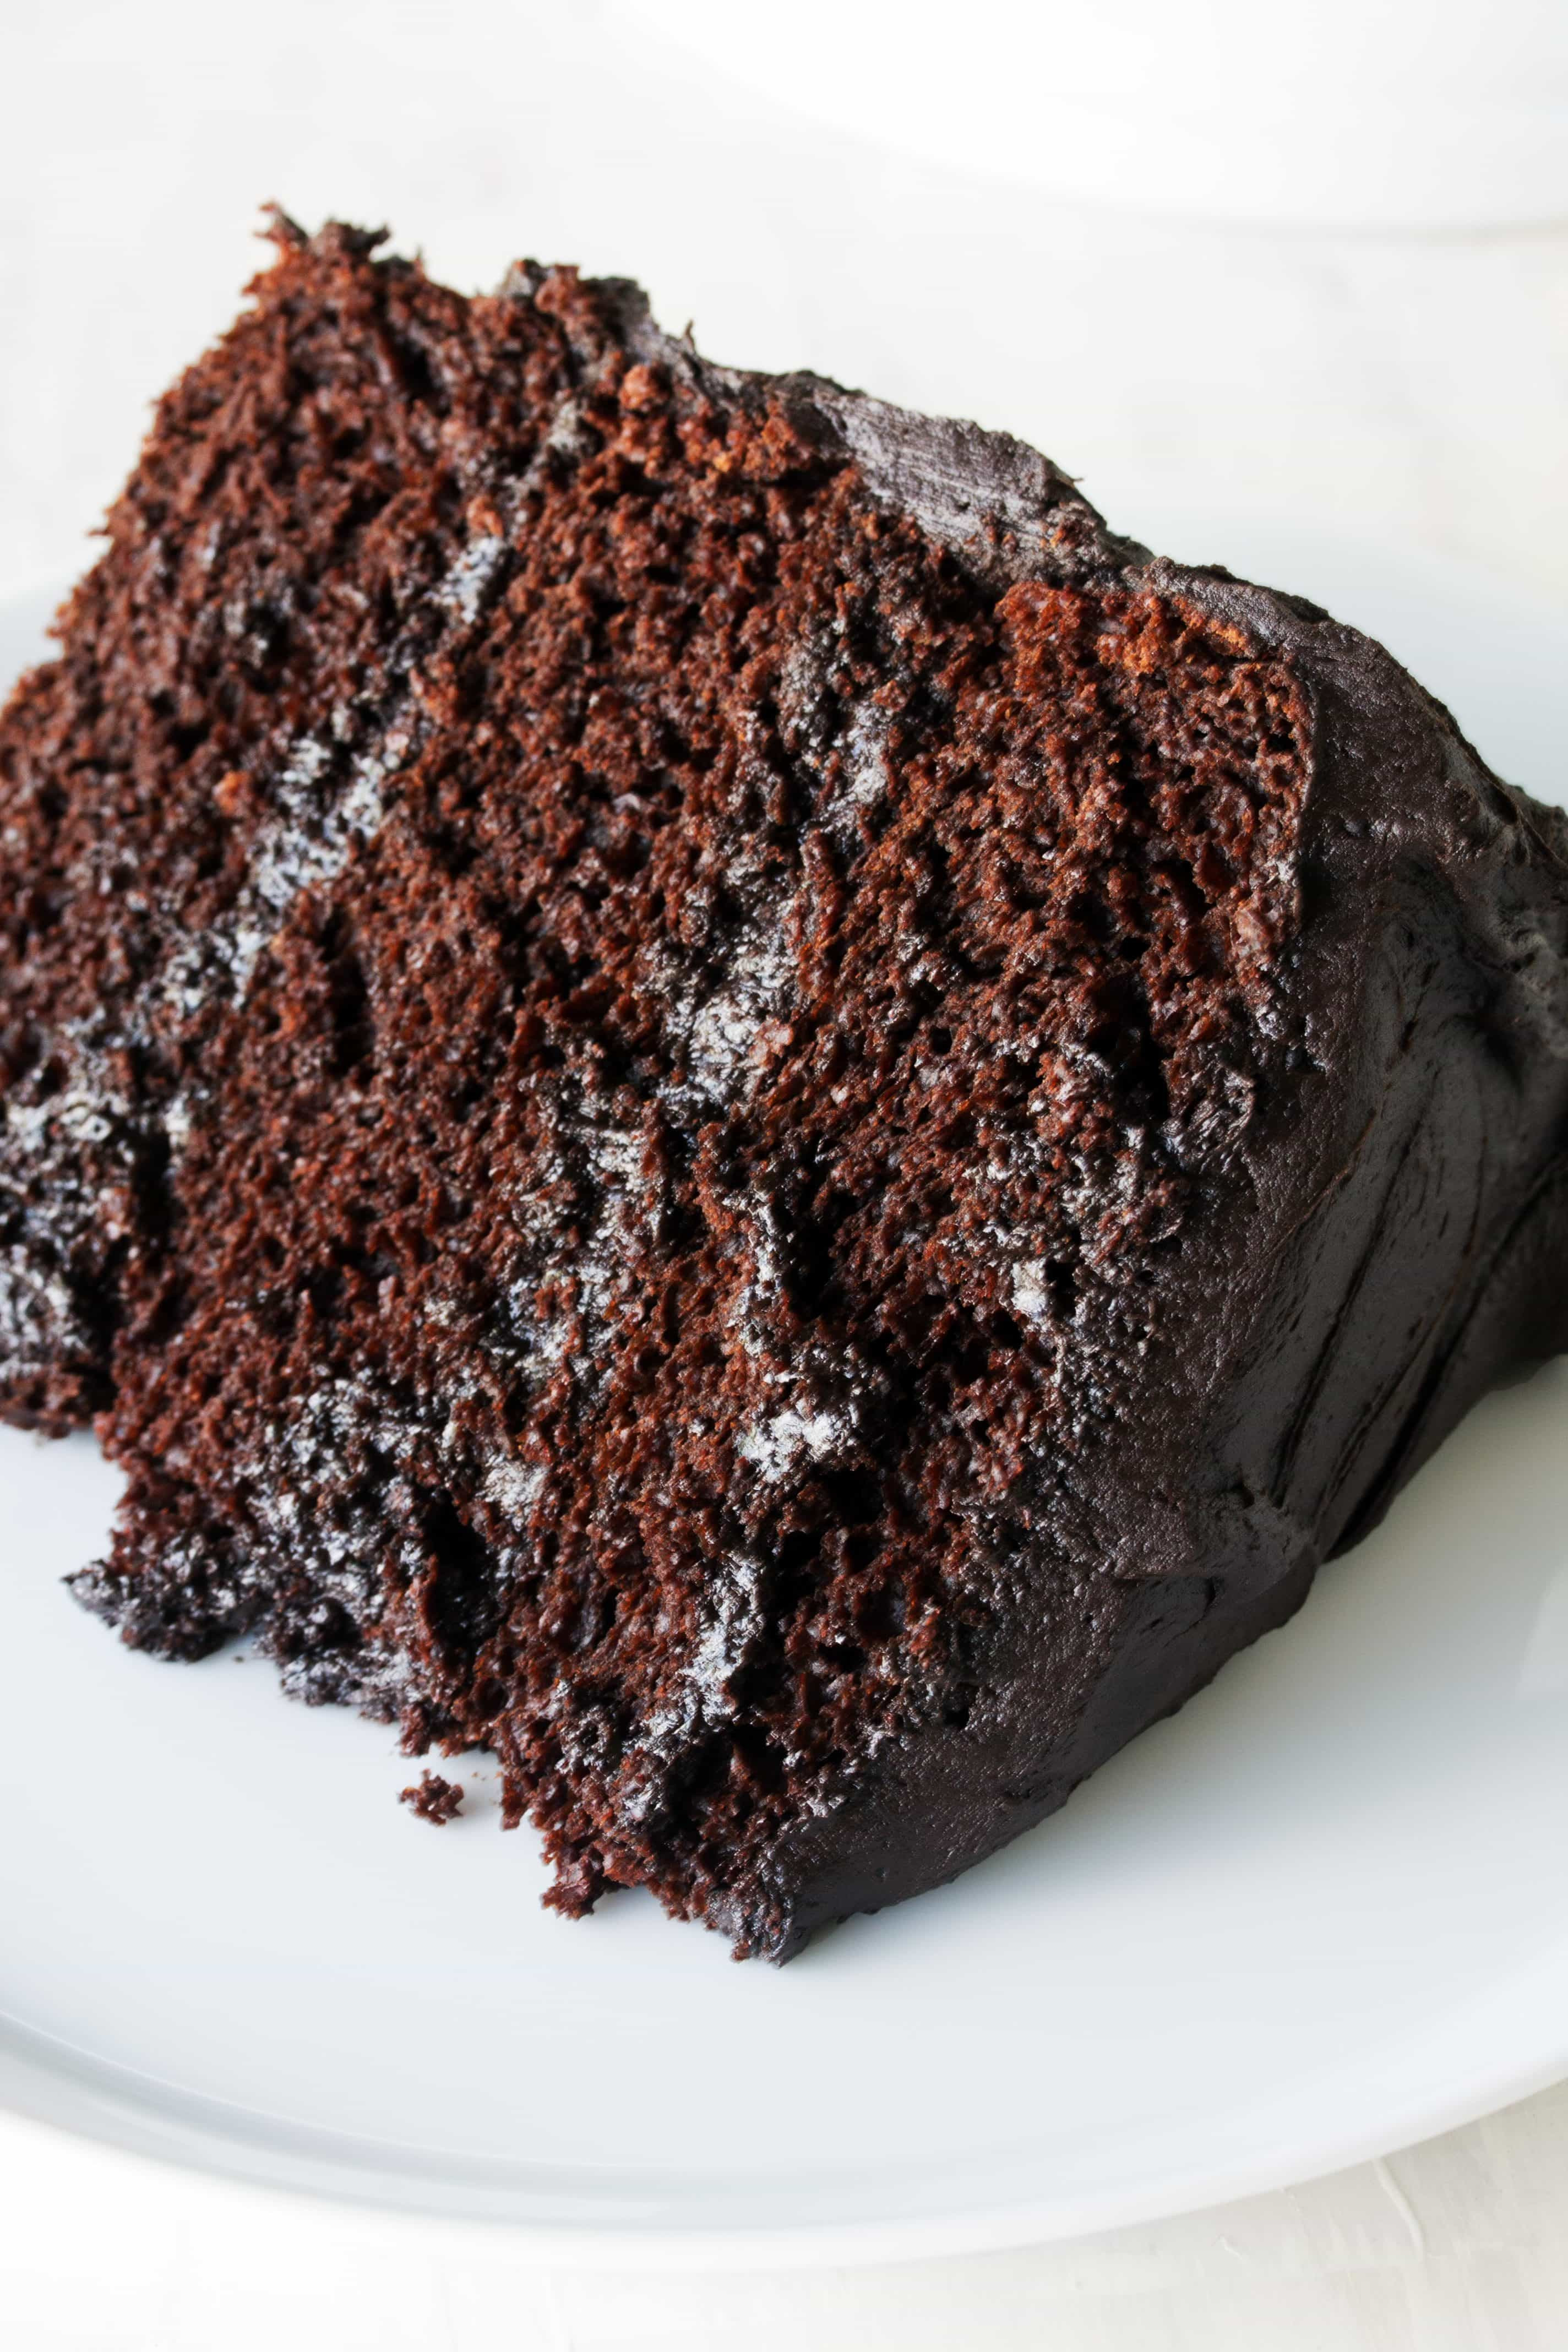 The Most Amazing Chocolate Cake
 The Most Amazing Chocolate Cake thestayathomechef